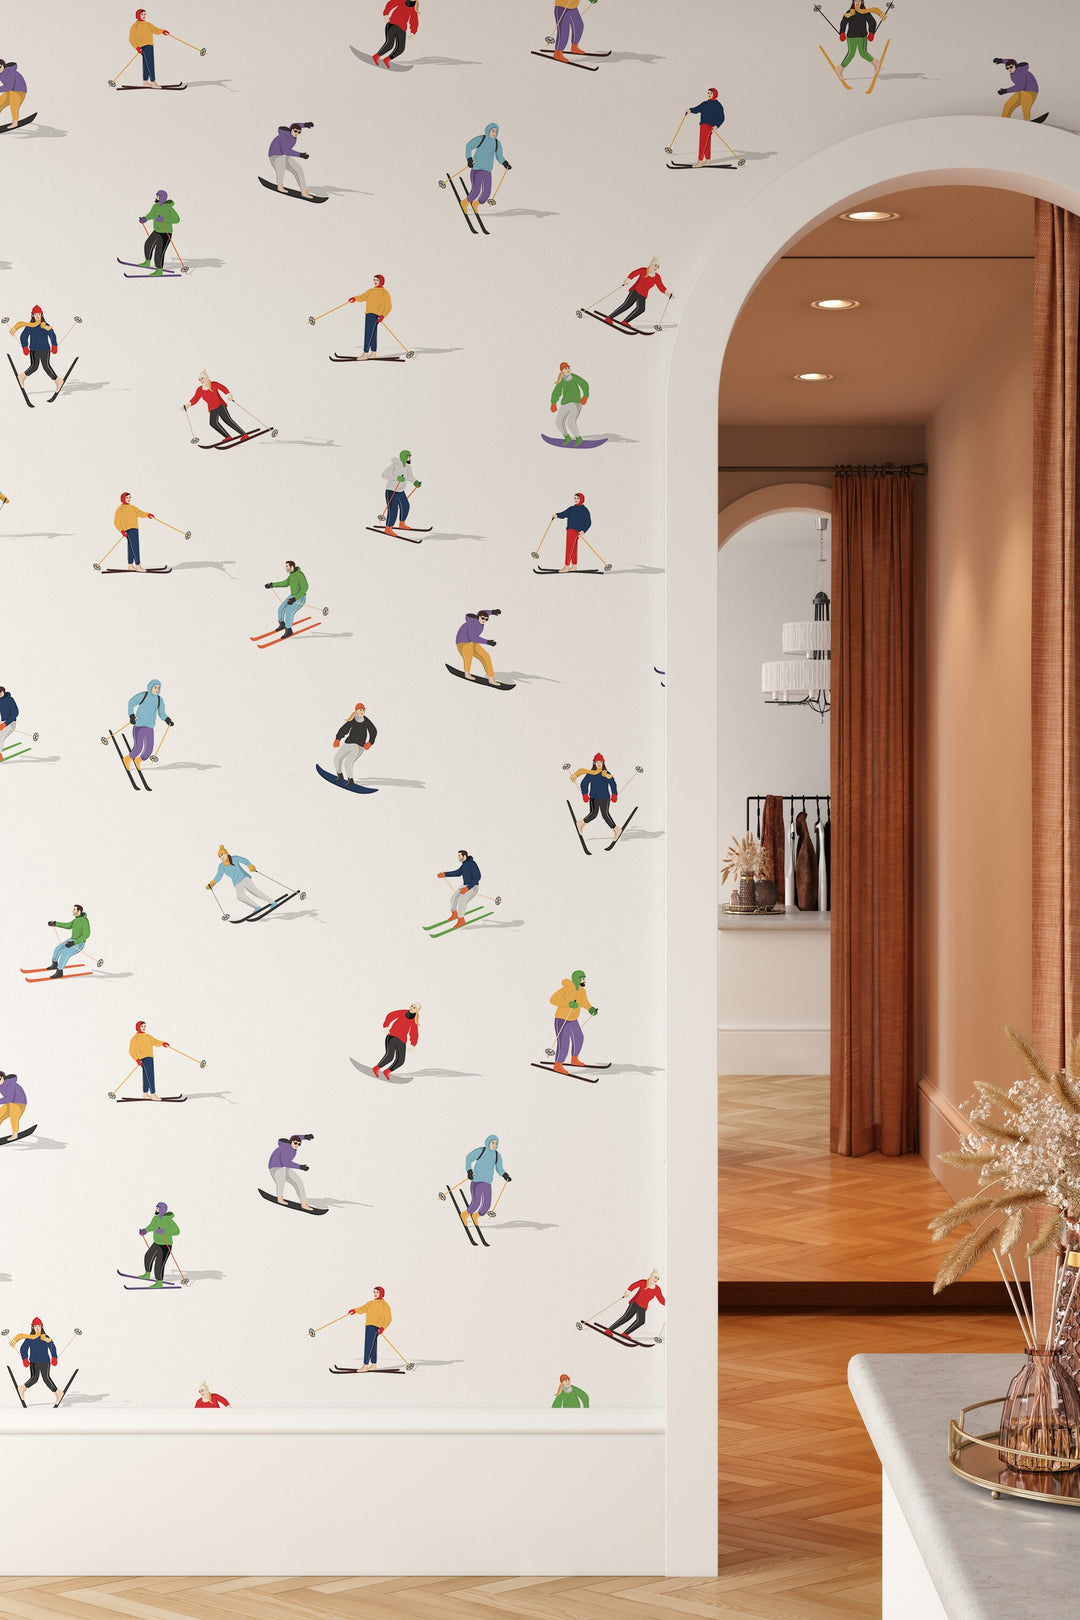 People on skis Retro White Wallpaper  - Peel & Stick Wallpaper - Removable Self Adhesive and Traditional wallpaper #3562